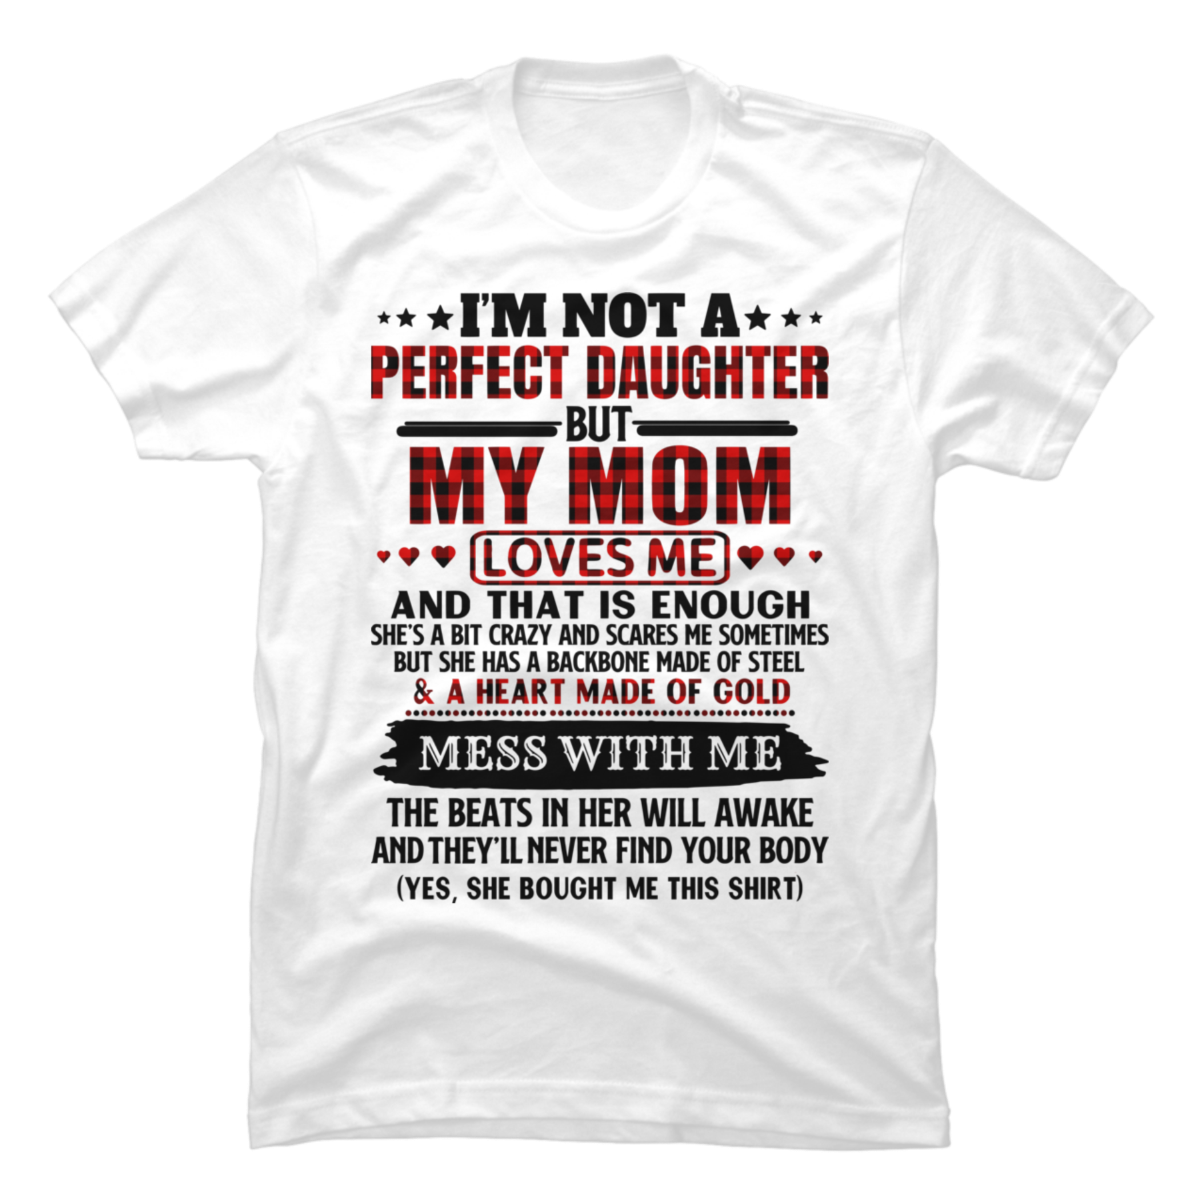 I'm Not A Perfect Daughter But My Mom Loves - Buy t-shirt designs